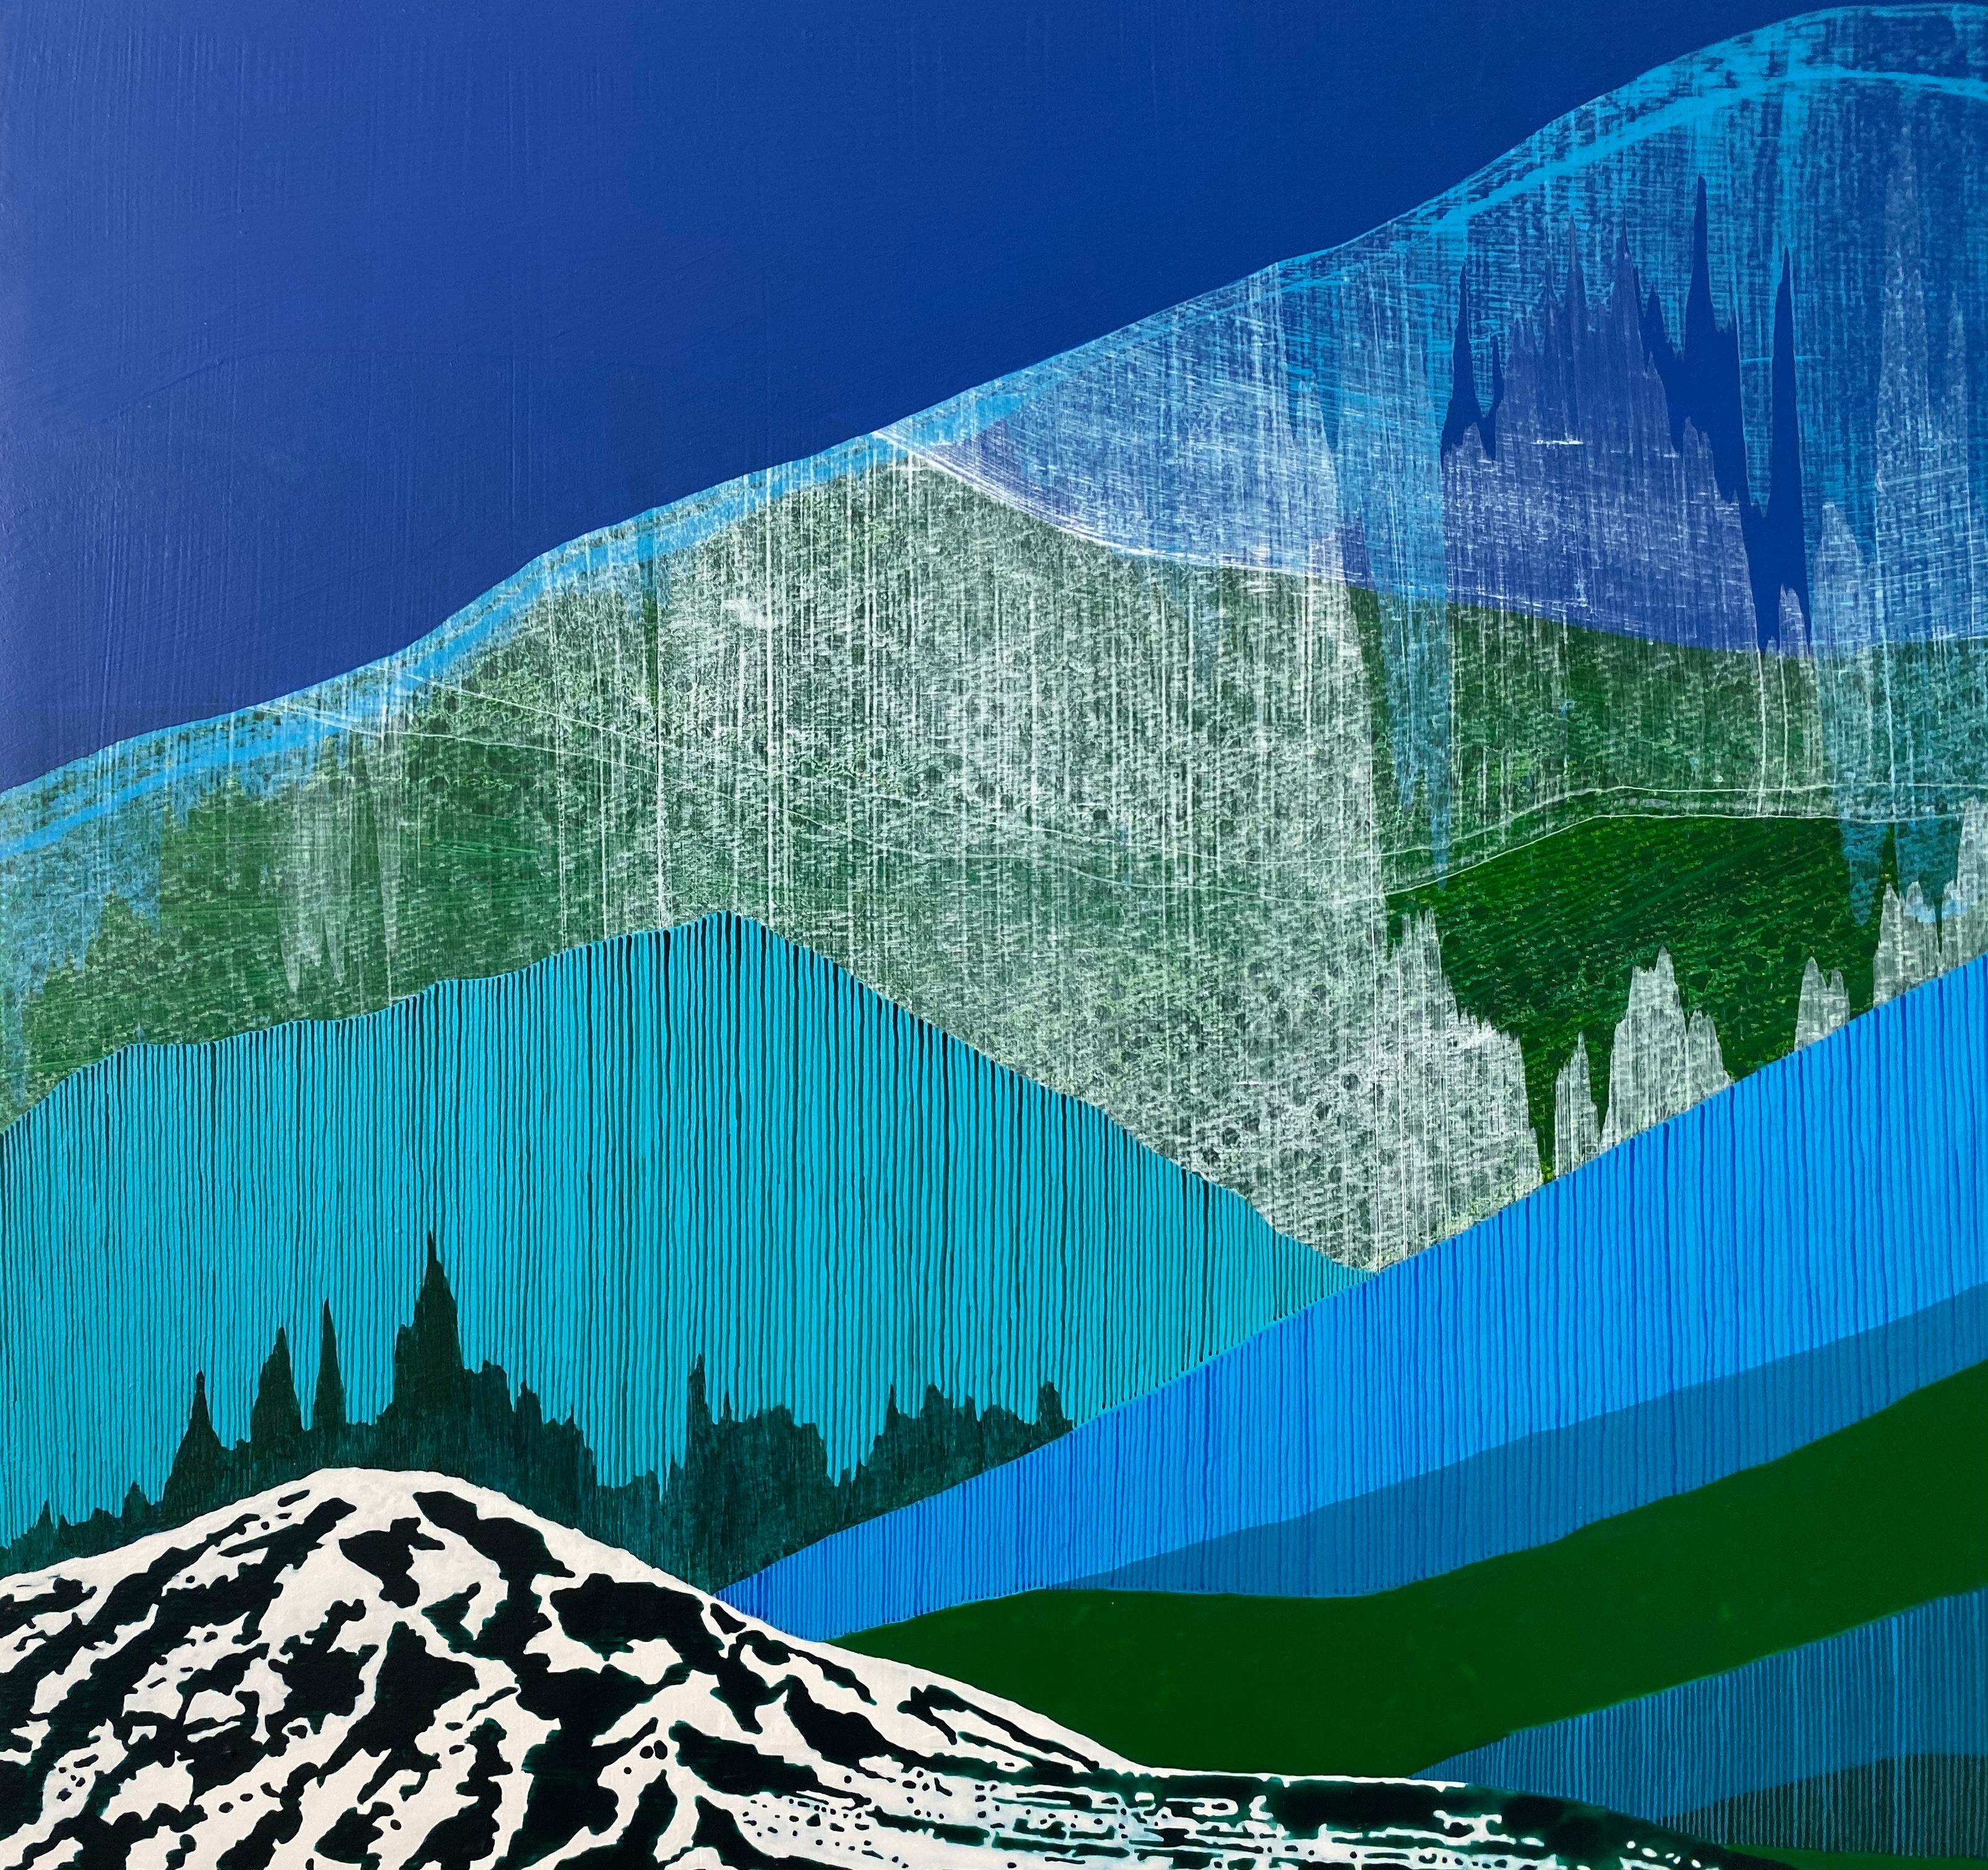 Tarn, blue and green mountain-scape on wood panel - Painting by James Isherwood